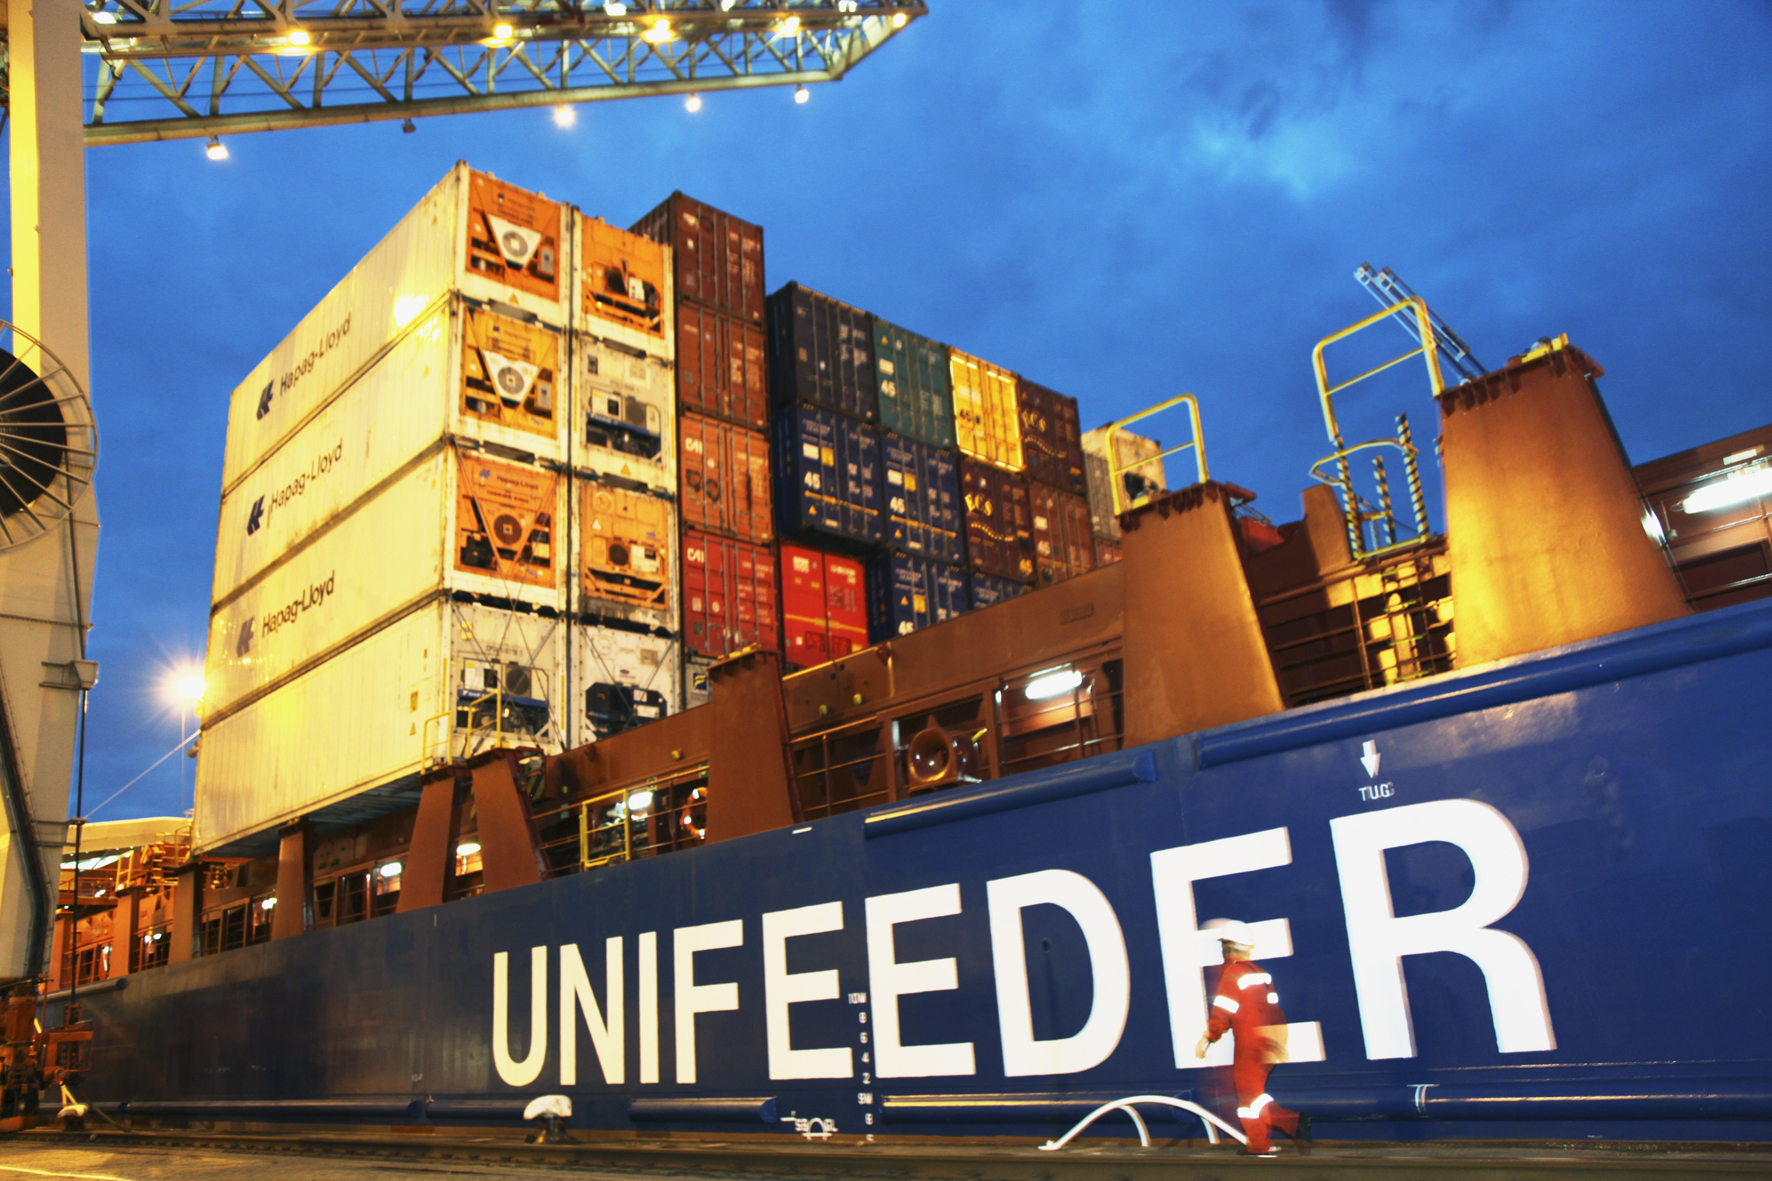 Unifeeder to use Digital Twin across its fleet to save on fuel and emissions